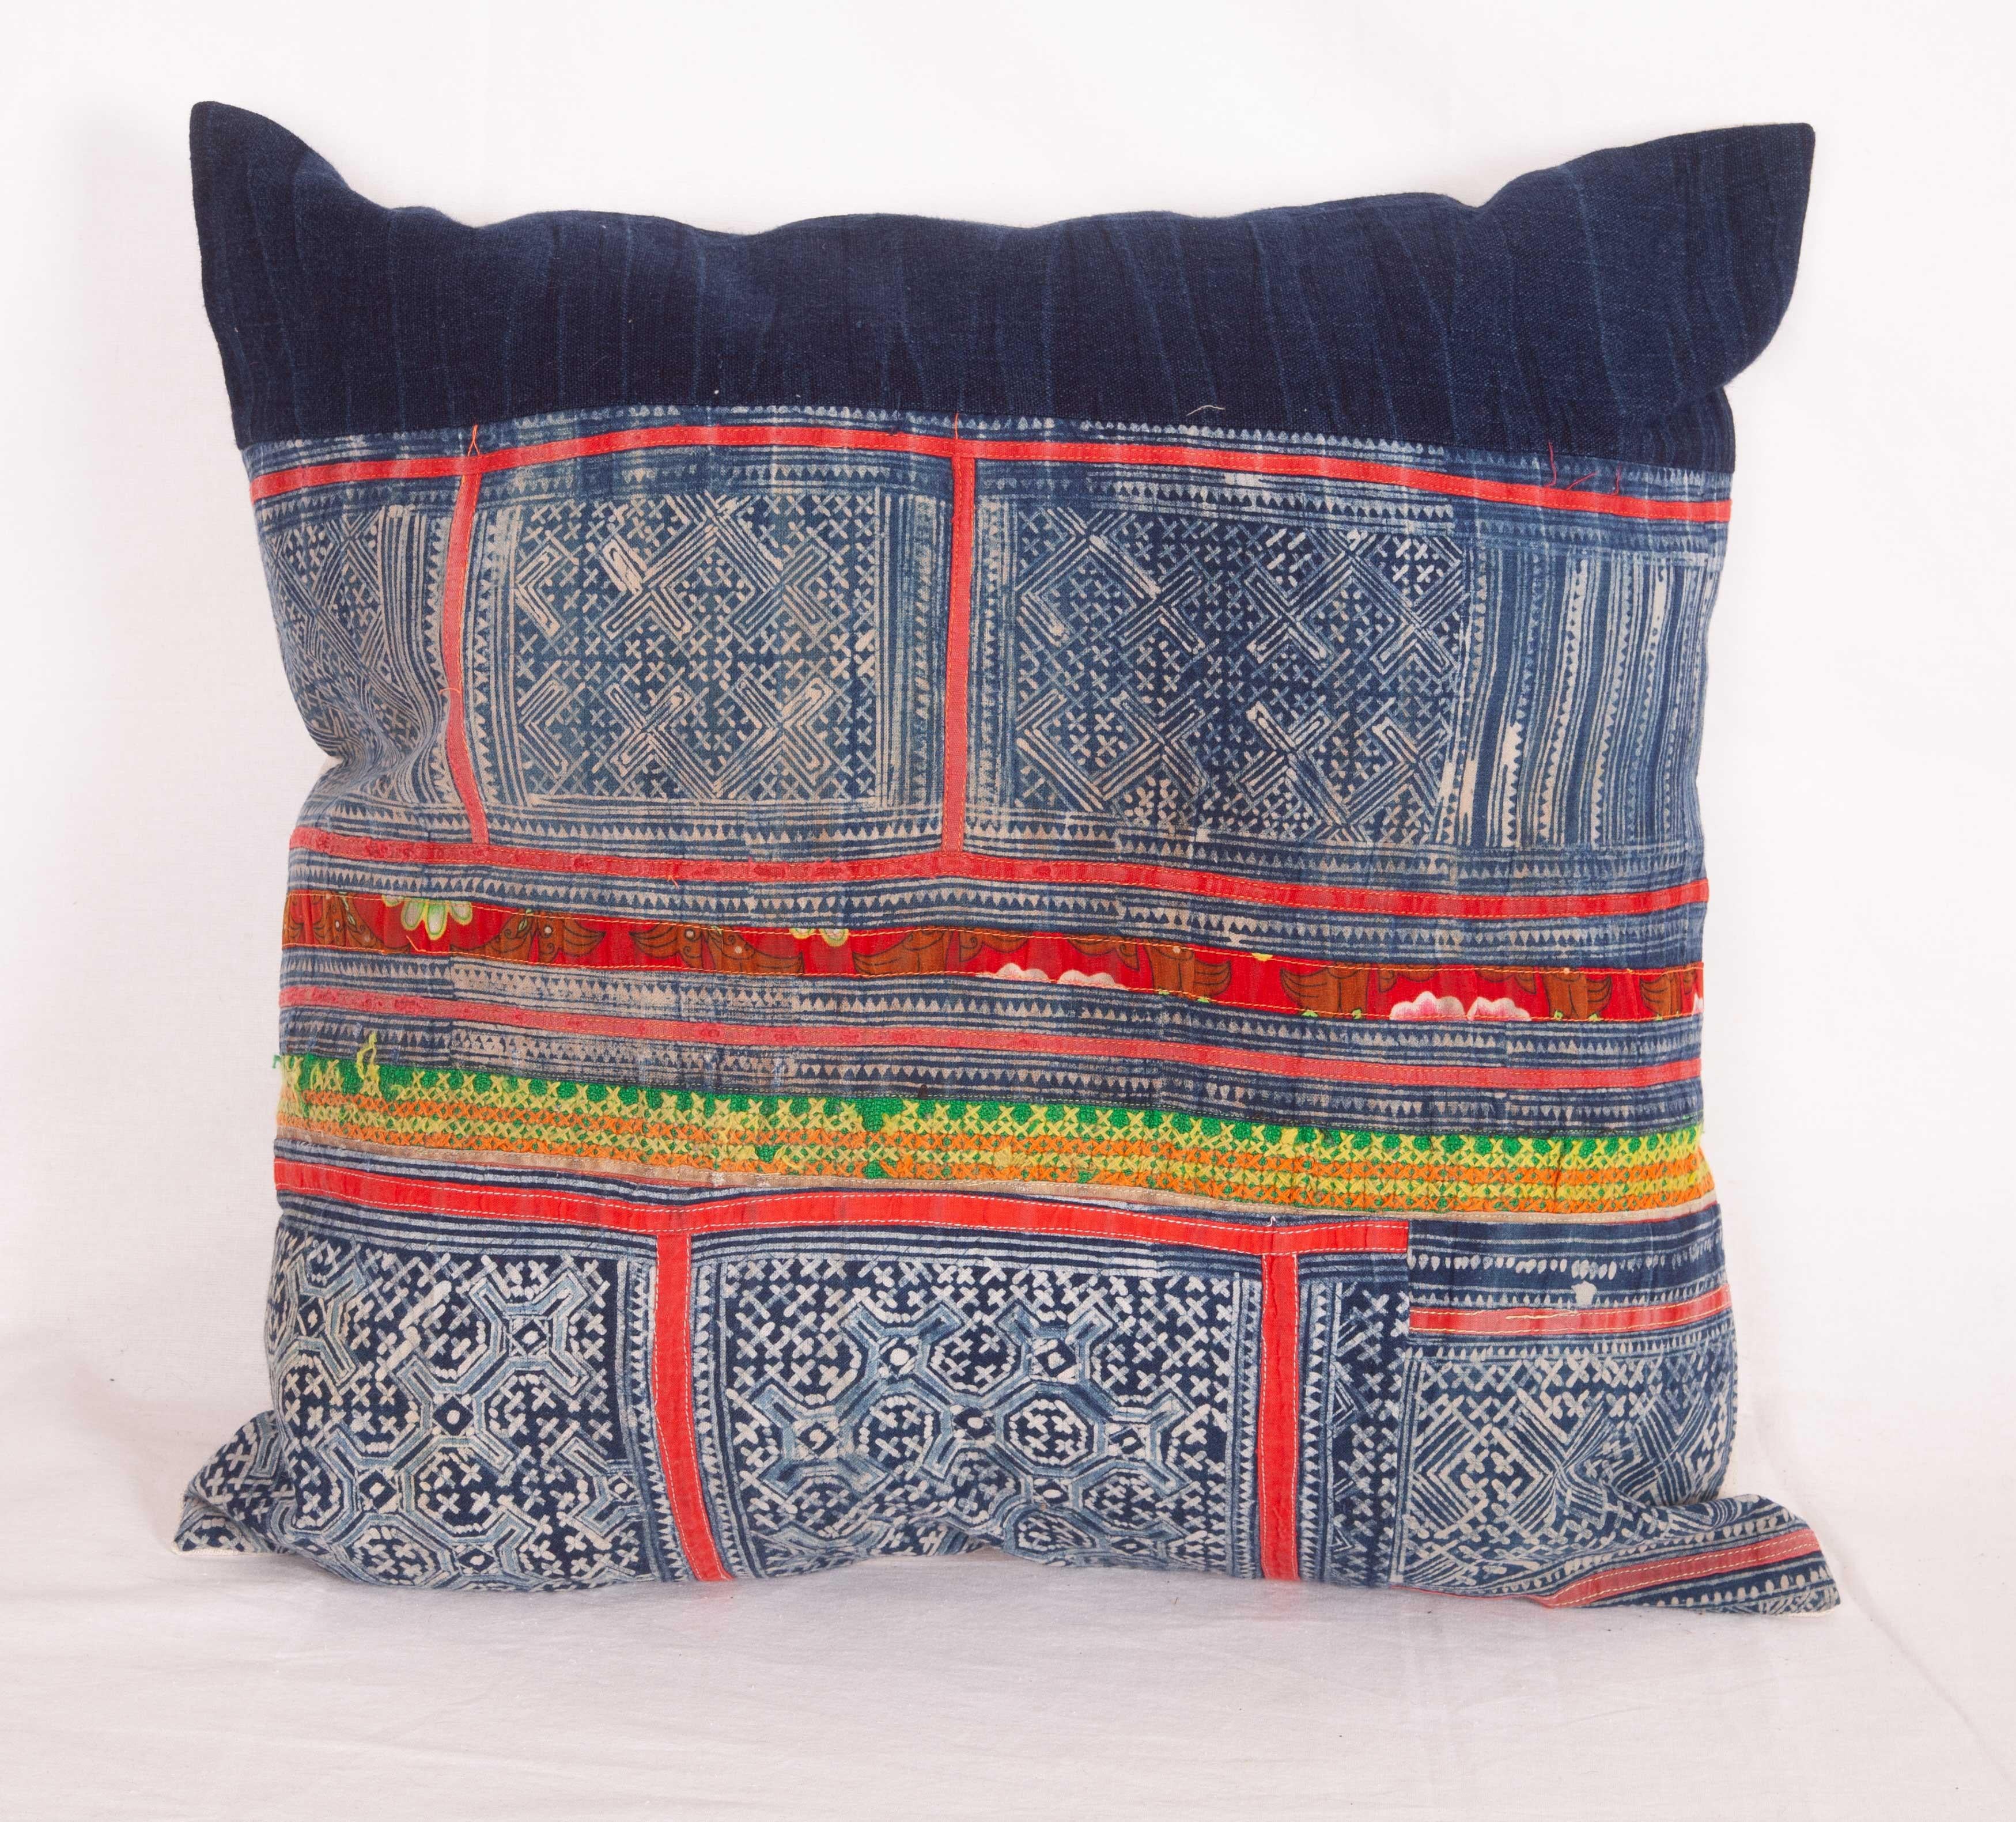 Tribal Vintage Pillow Cases / Cushions Made from a Hmong Hill Tribe Batik Textile